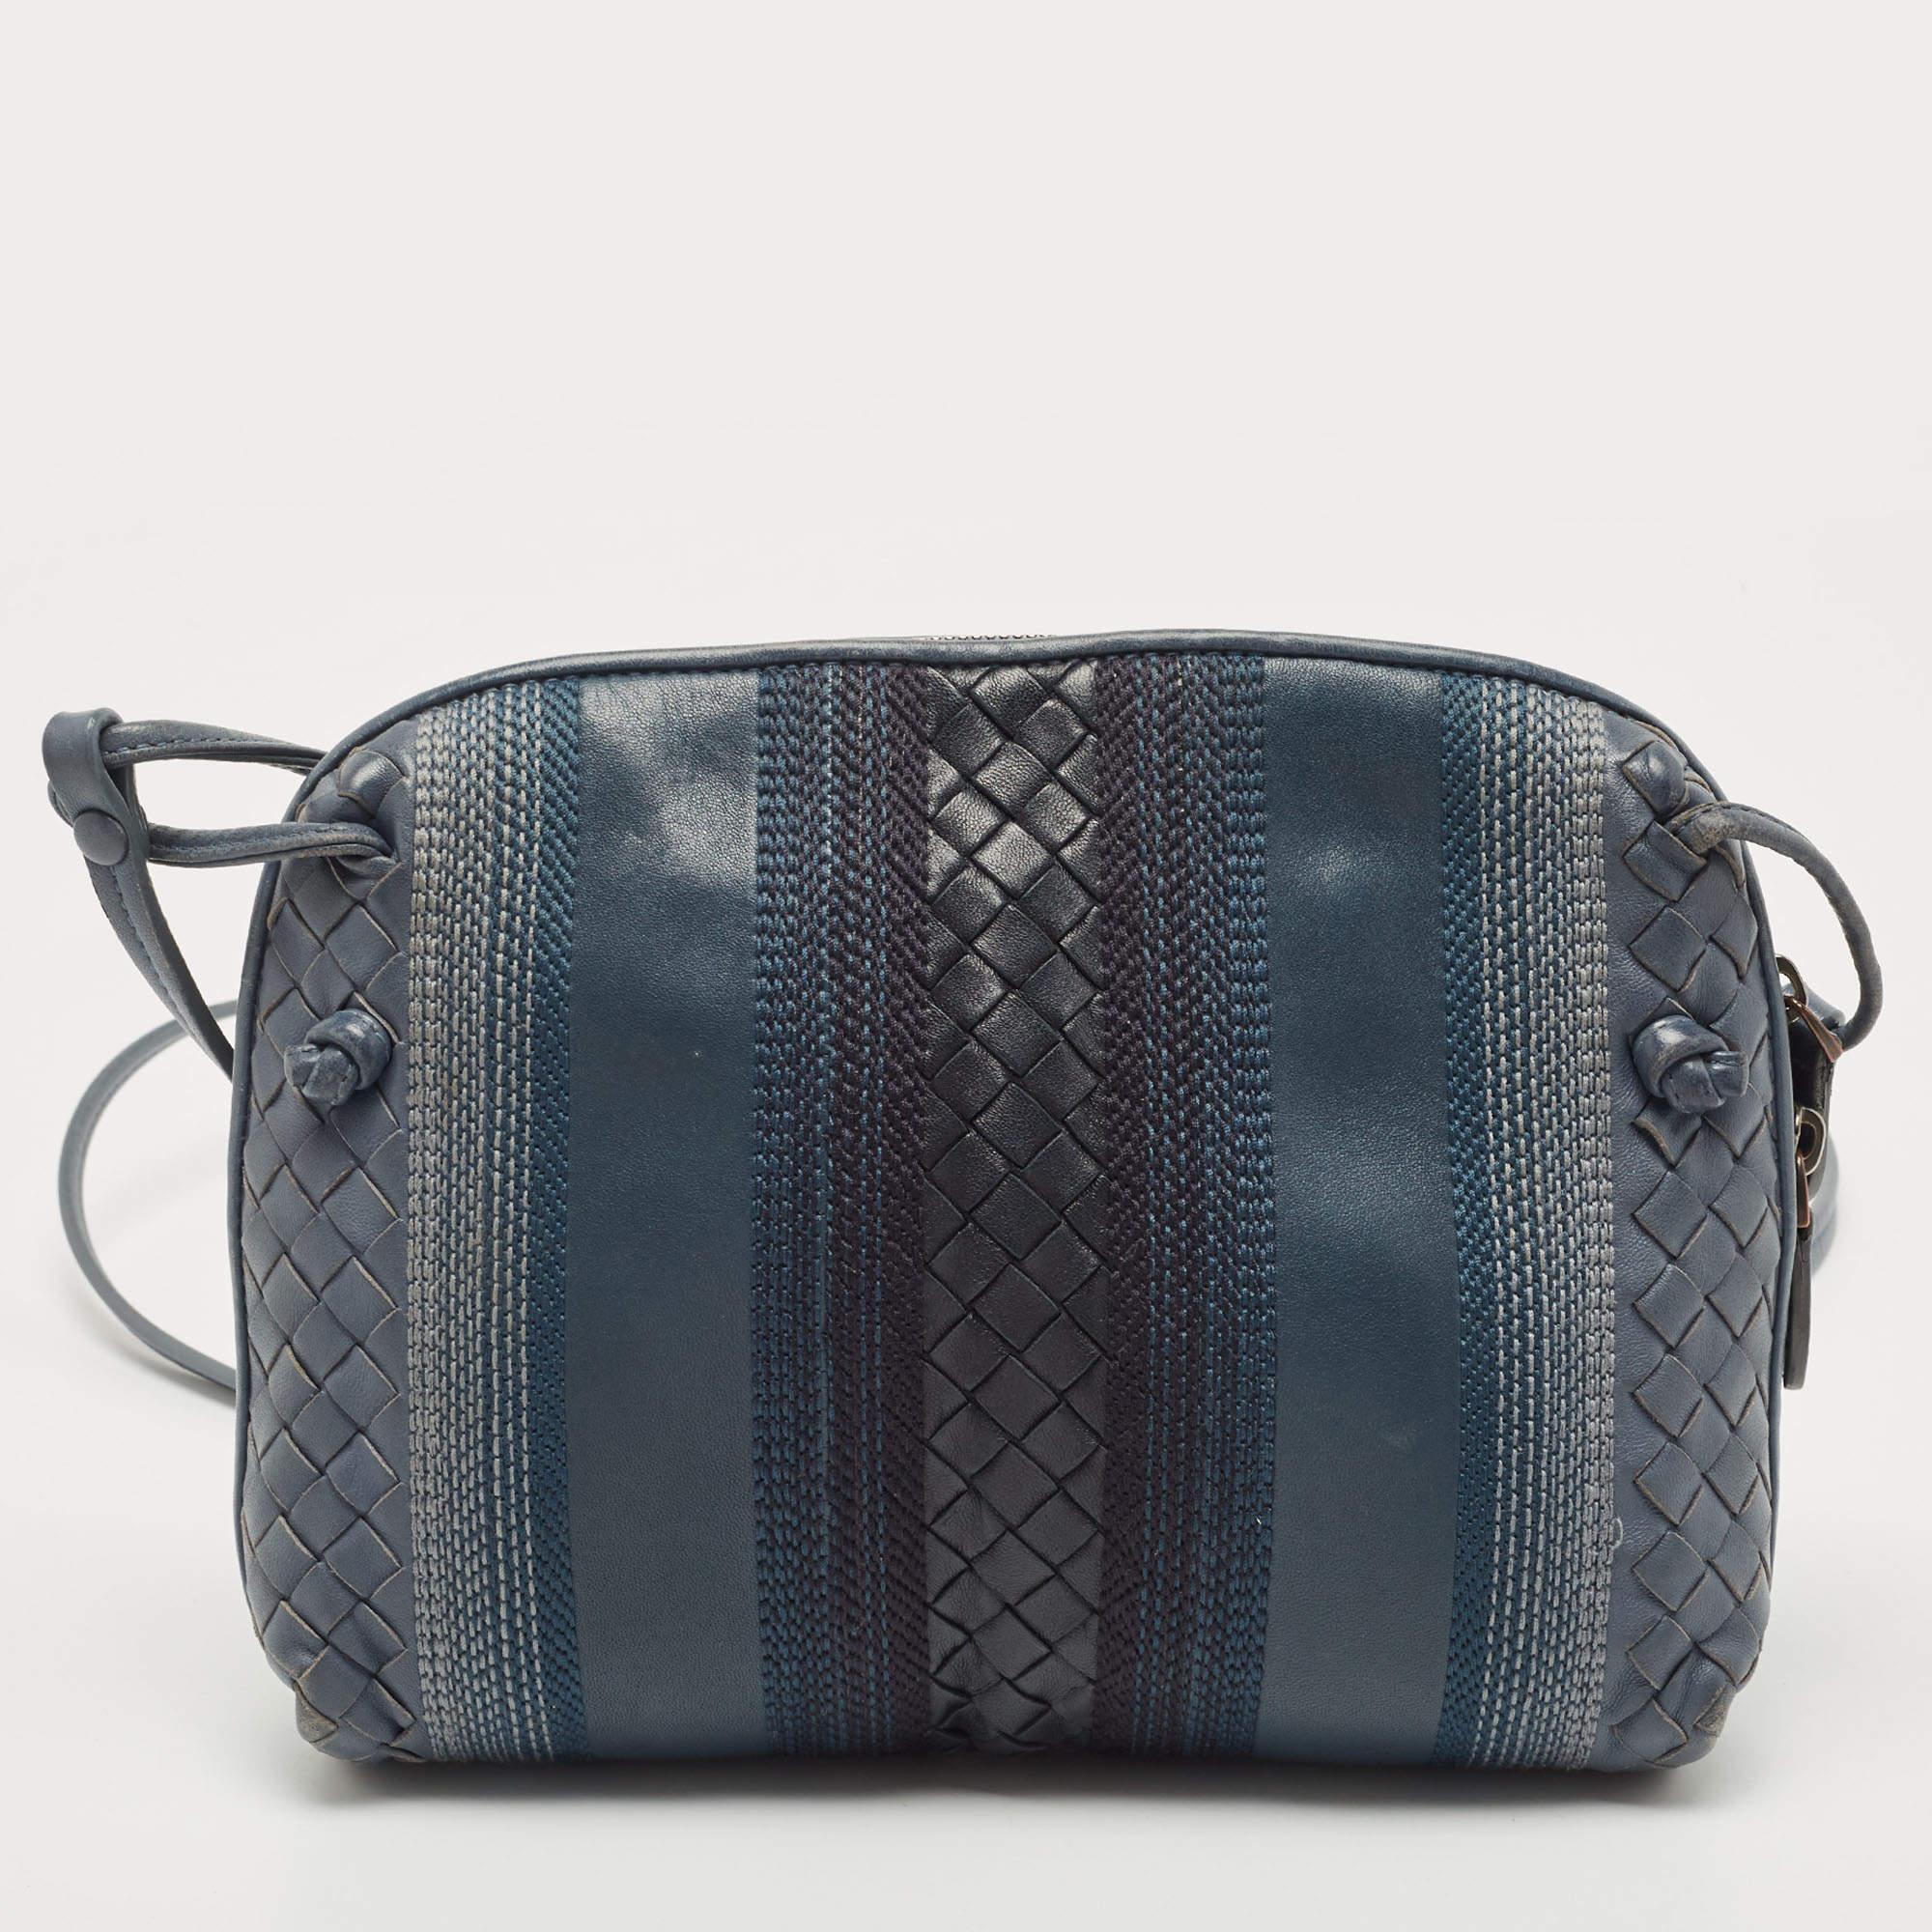 Structured, sophisticated, and stylish are some words that describe this crossbody bag! Crafted from best quality material, the creation is adorned with the label's signature appeal, held by comfortable handles, and equipped with a well-spaced